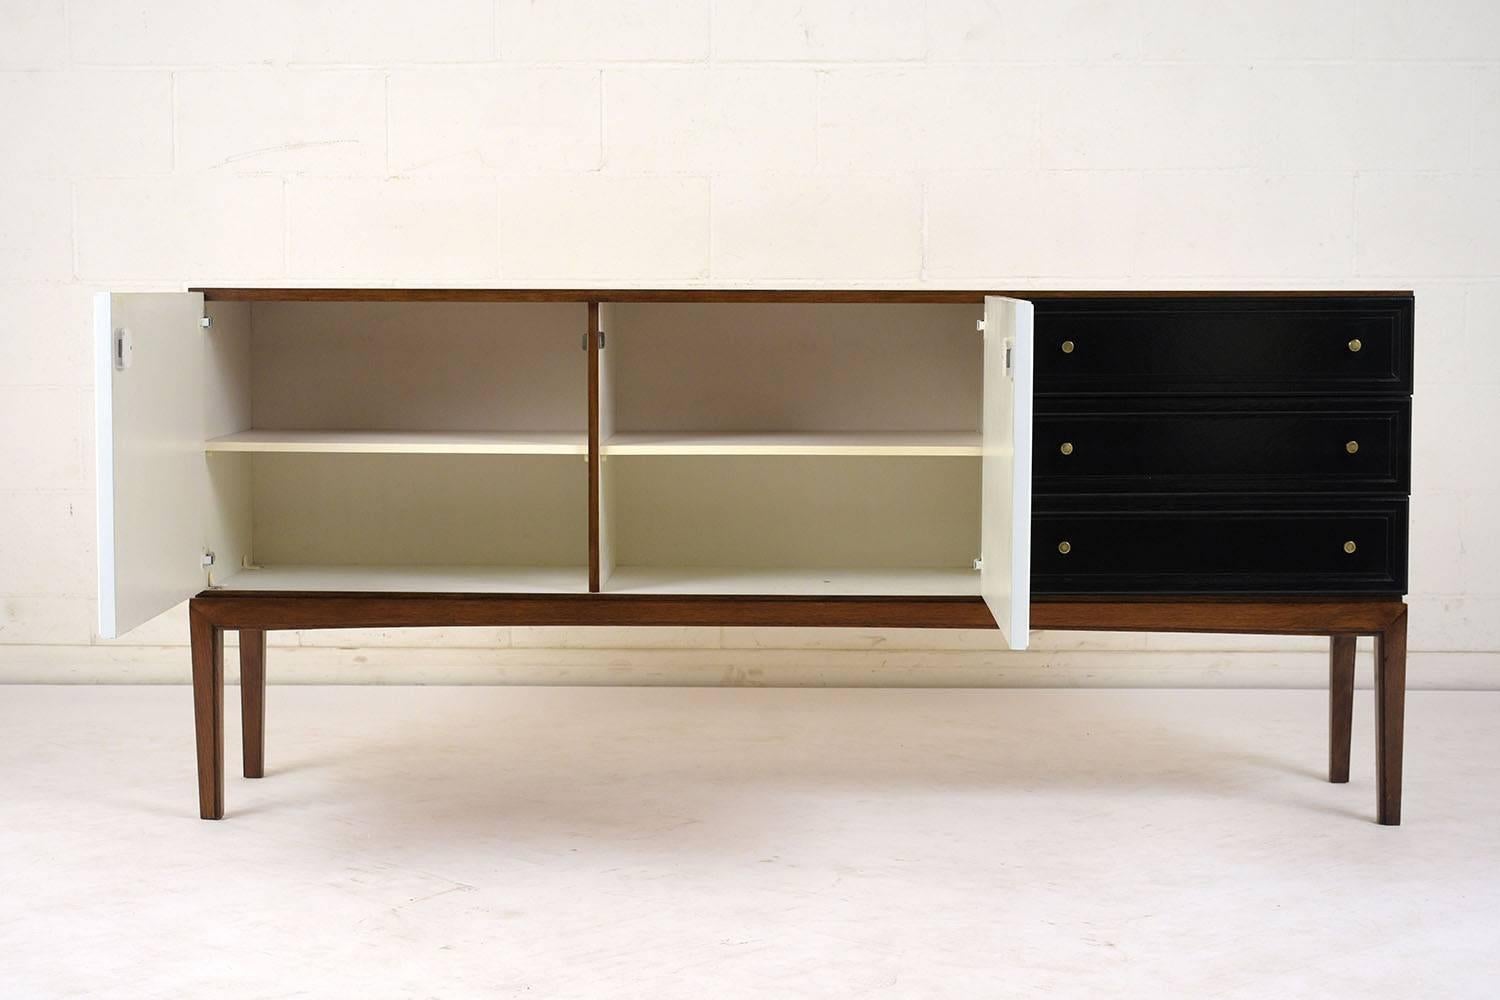 This 1960s Danish Lubke credenza is made of teak wood finished in a rich walnut color with a black and white facade and a lacquered finish. There are three drawers and two cabinet doors with brass knobs. Inside the cabinets there is two sections